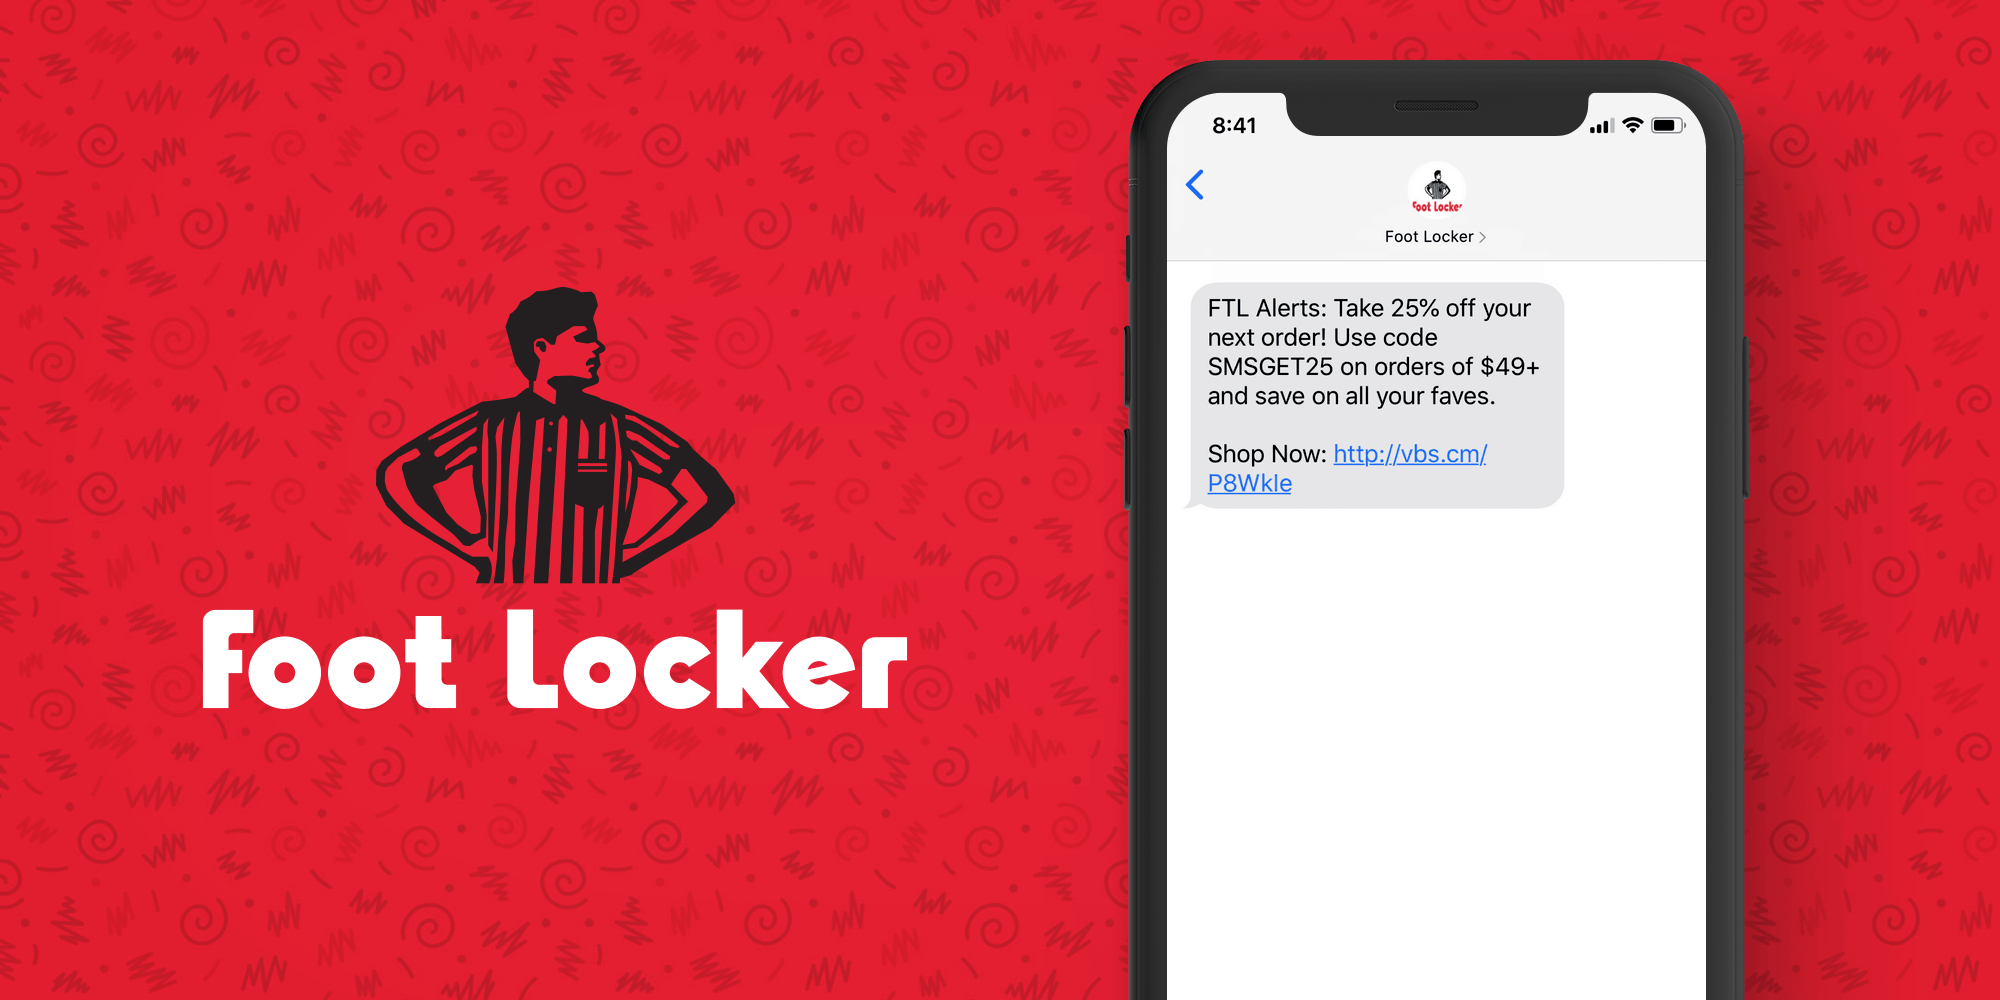 Foot Locker SMS Marketing Example - 50 Examples of Brands Using SMS Marketing